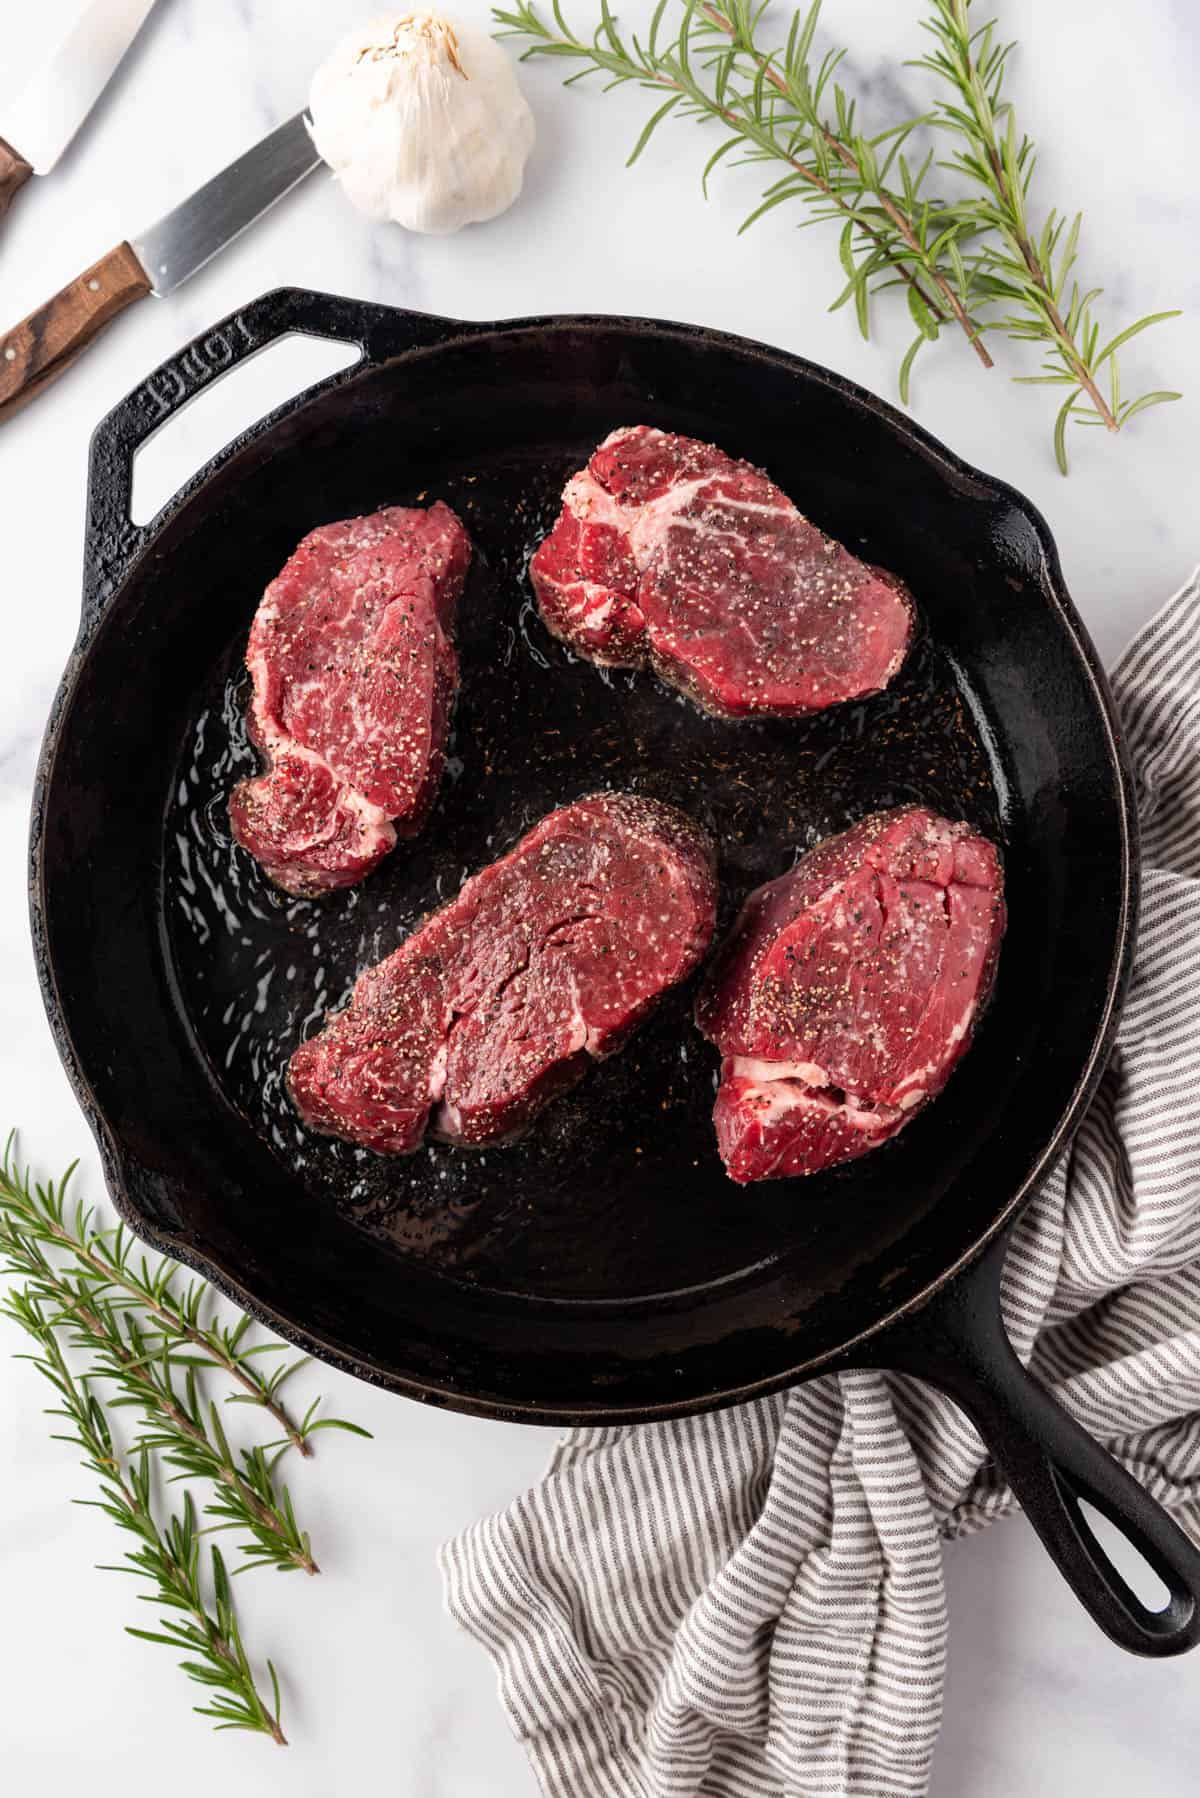 Adding seasoned filet mignon to a very hot cast iron skillet to sear it.